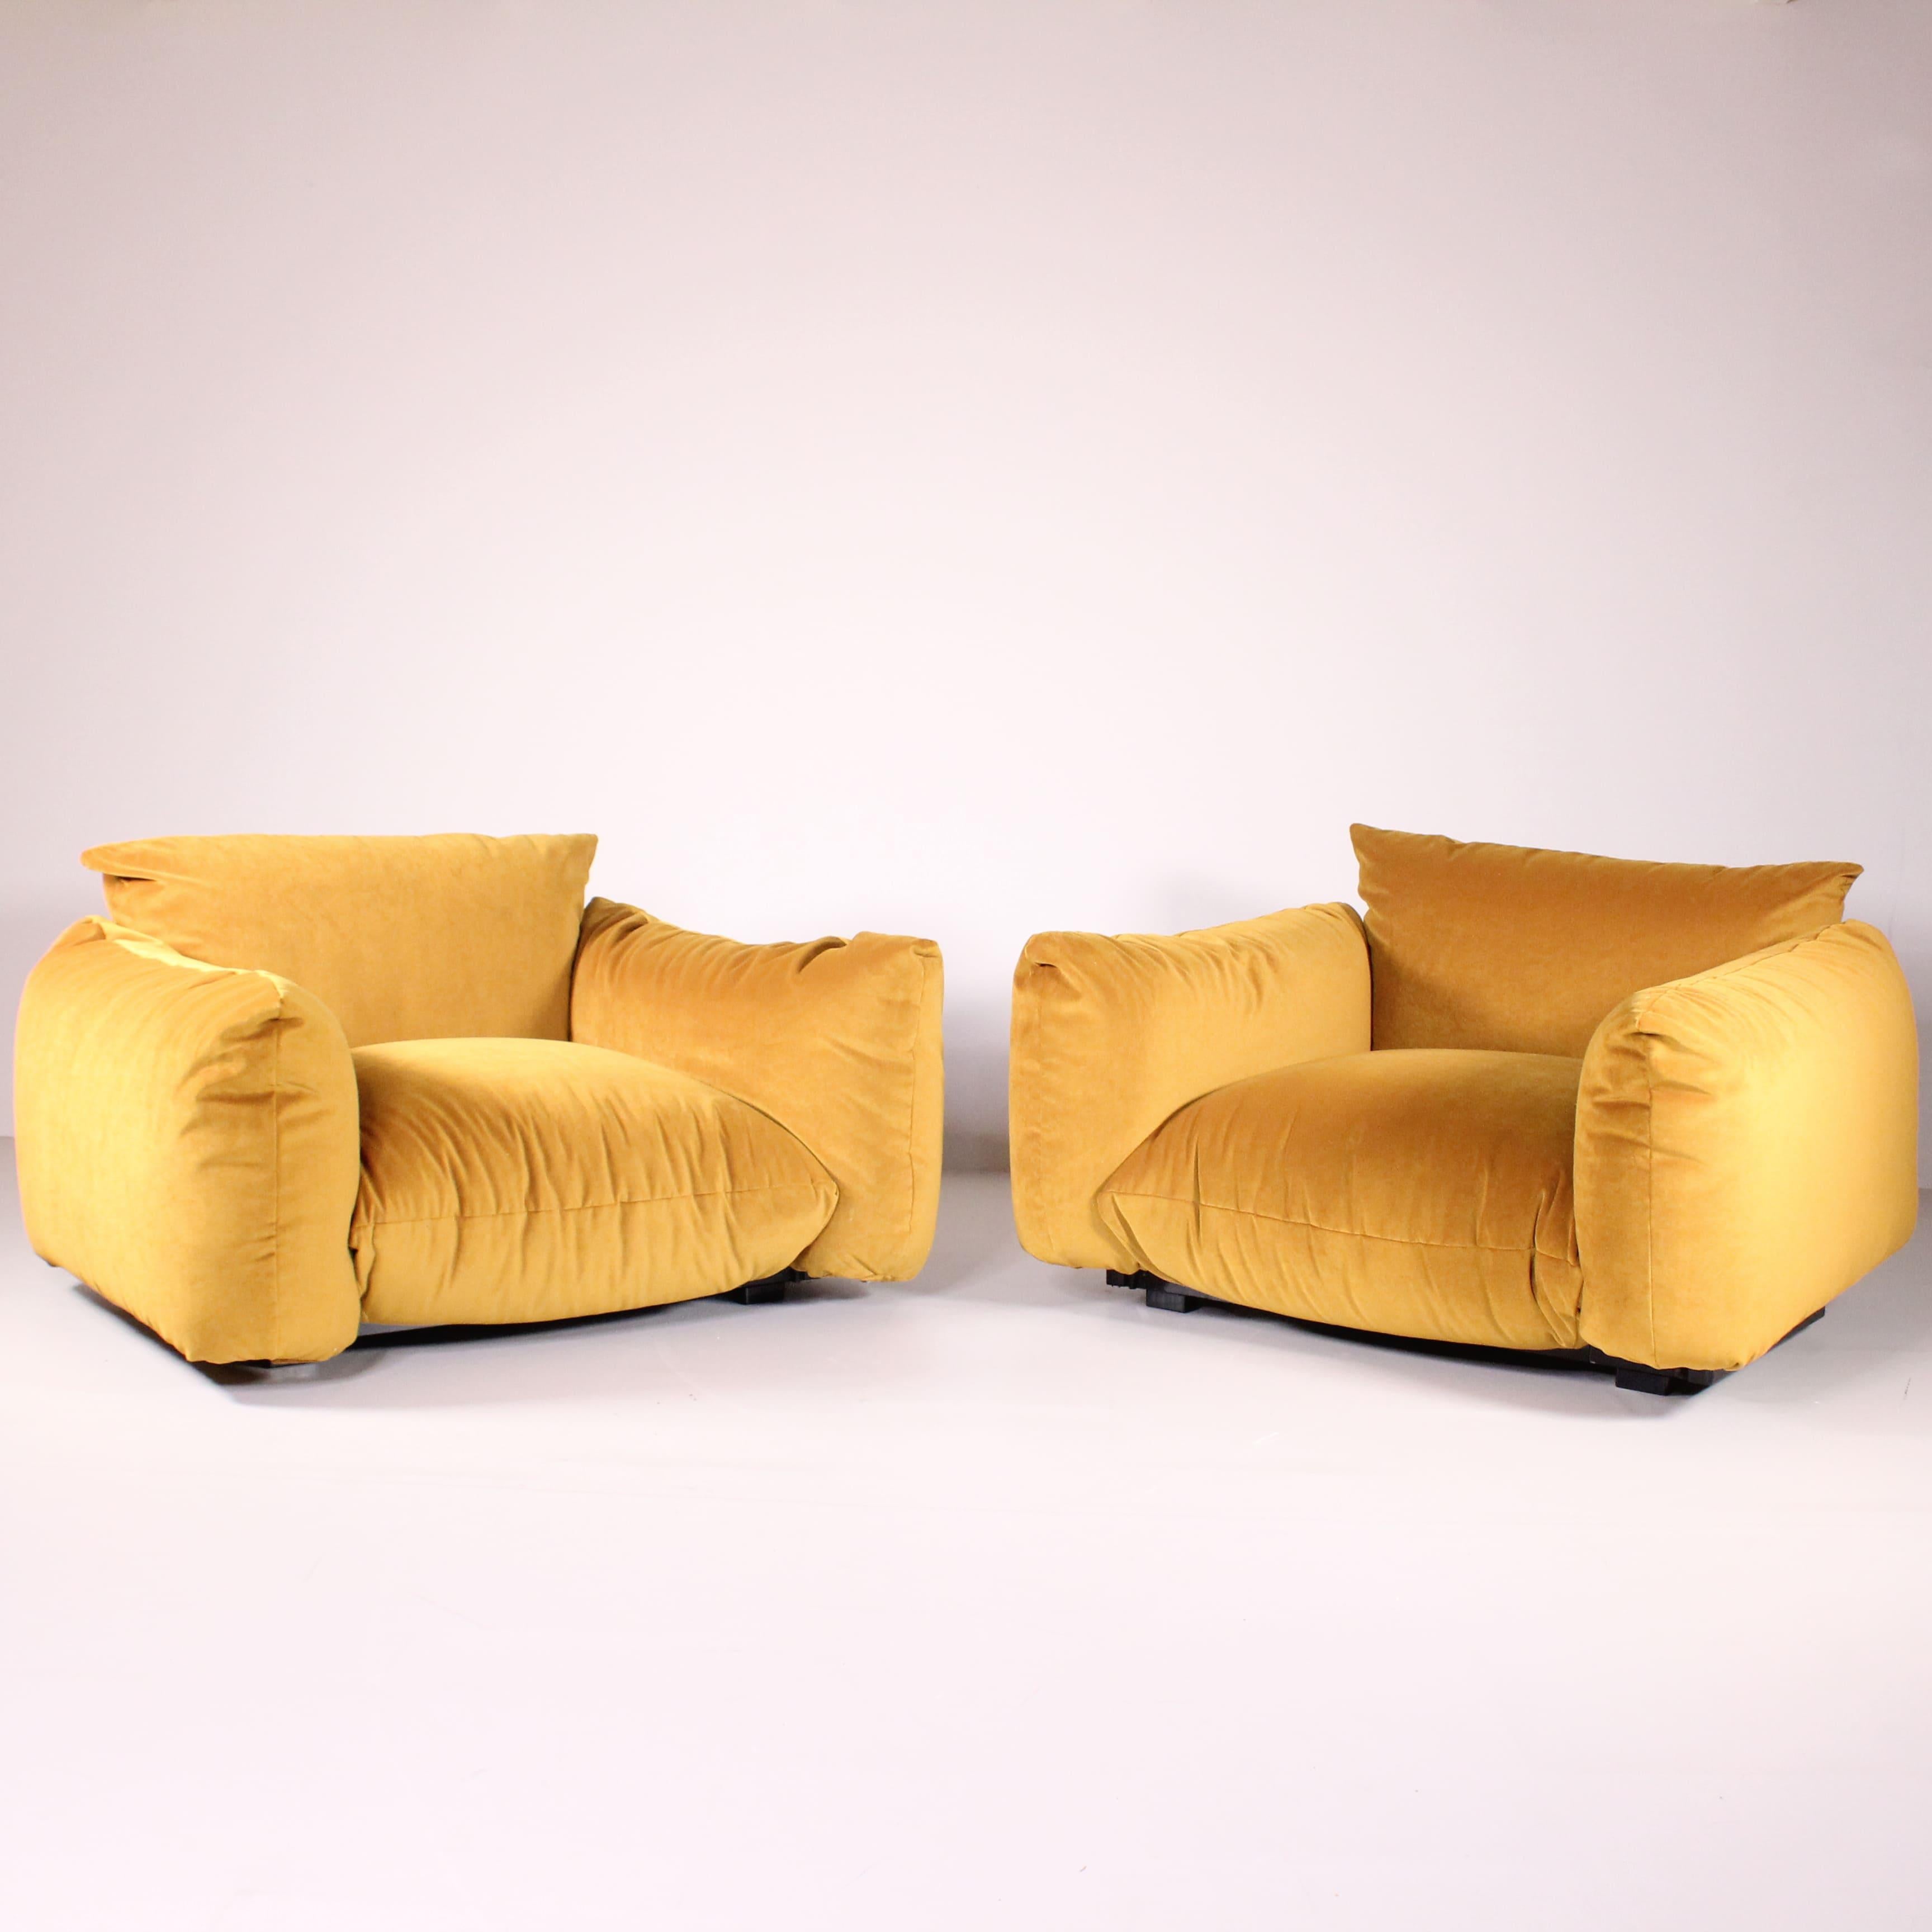 Modern Marenco sofa and 2 armchairs set, Mario Marenco for Arflex, 1970 For Sale